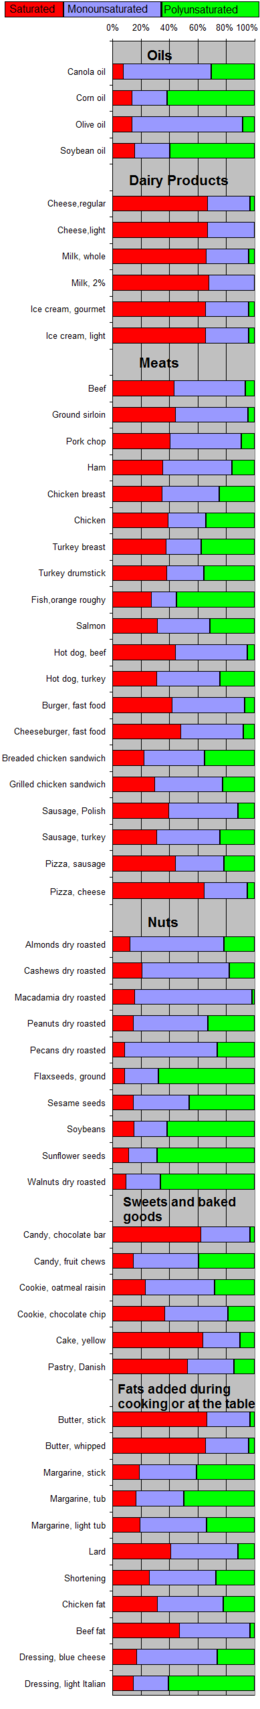 Fat composition in foods.png